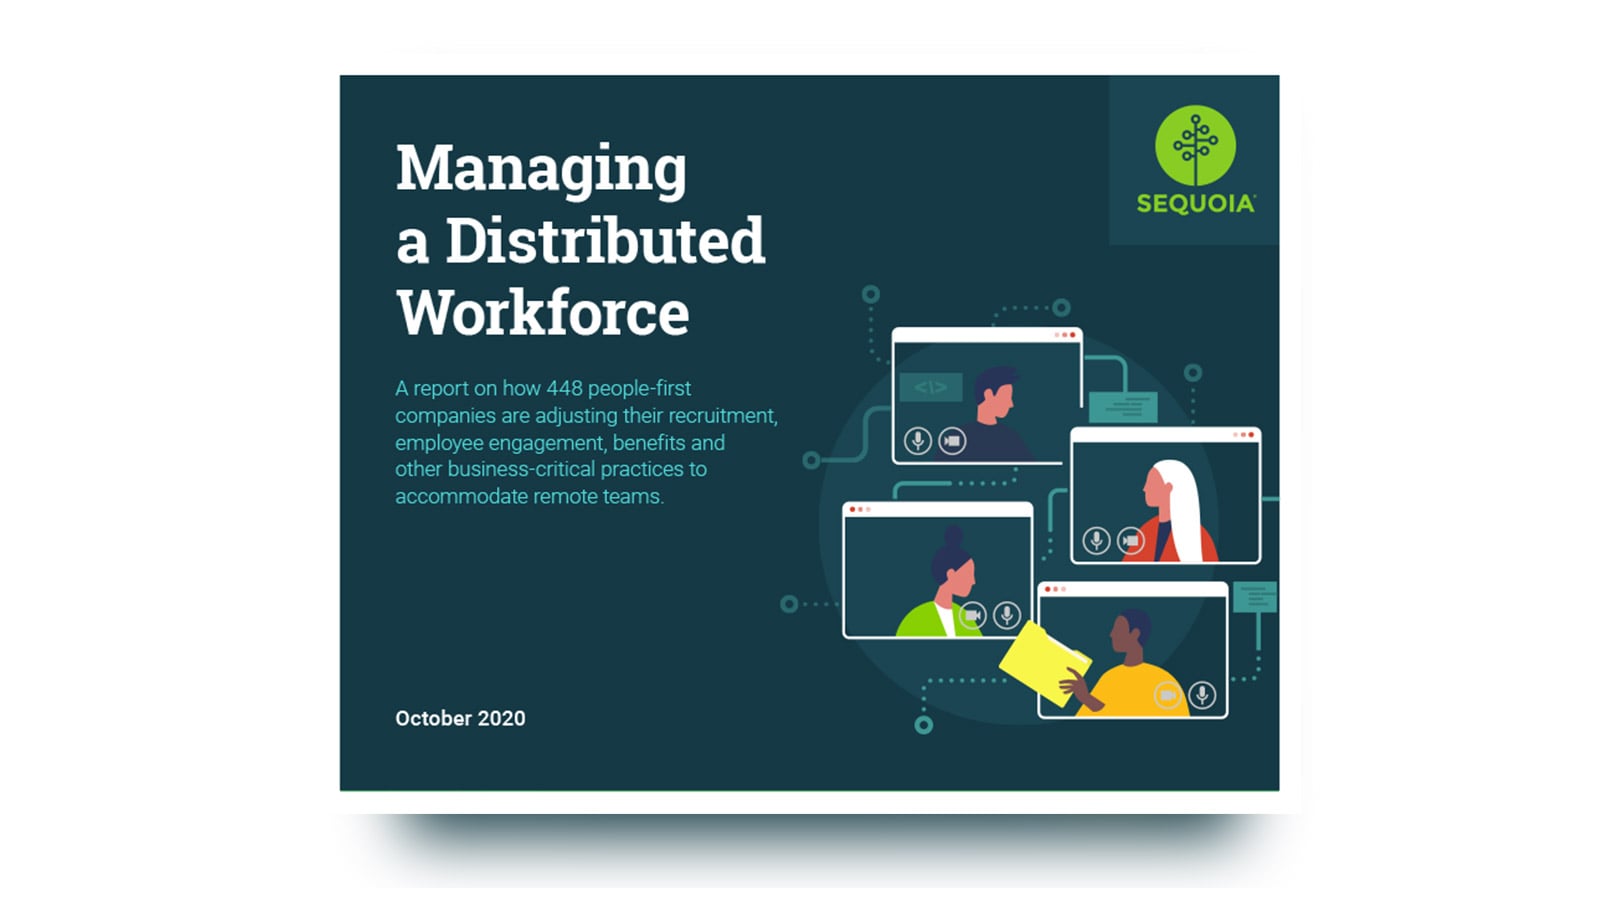 Return to Workplace Report Cover